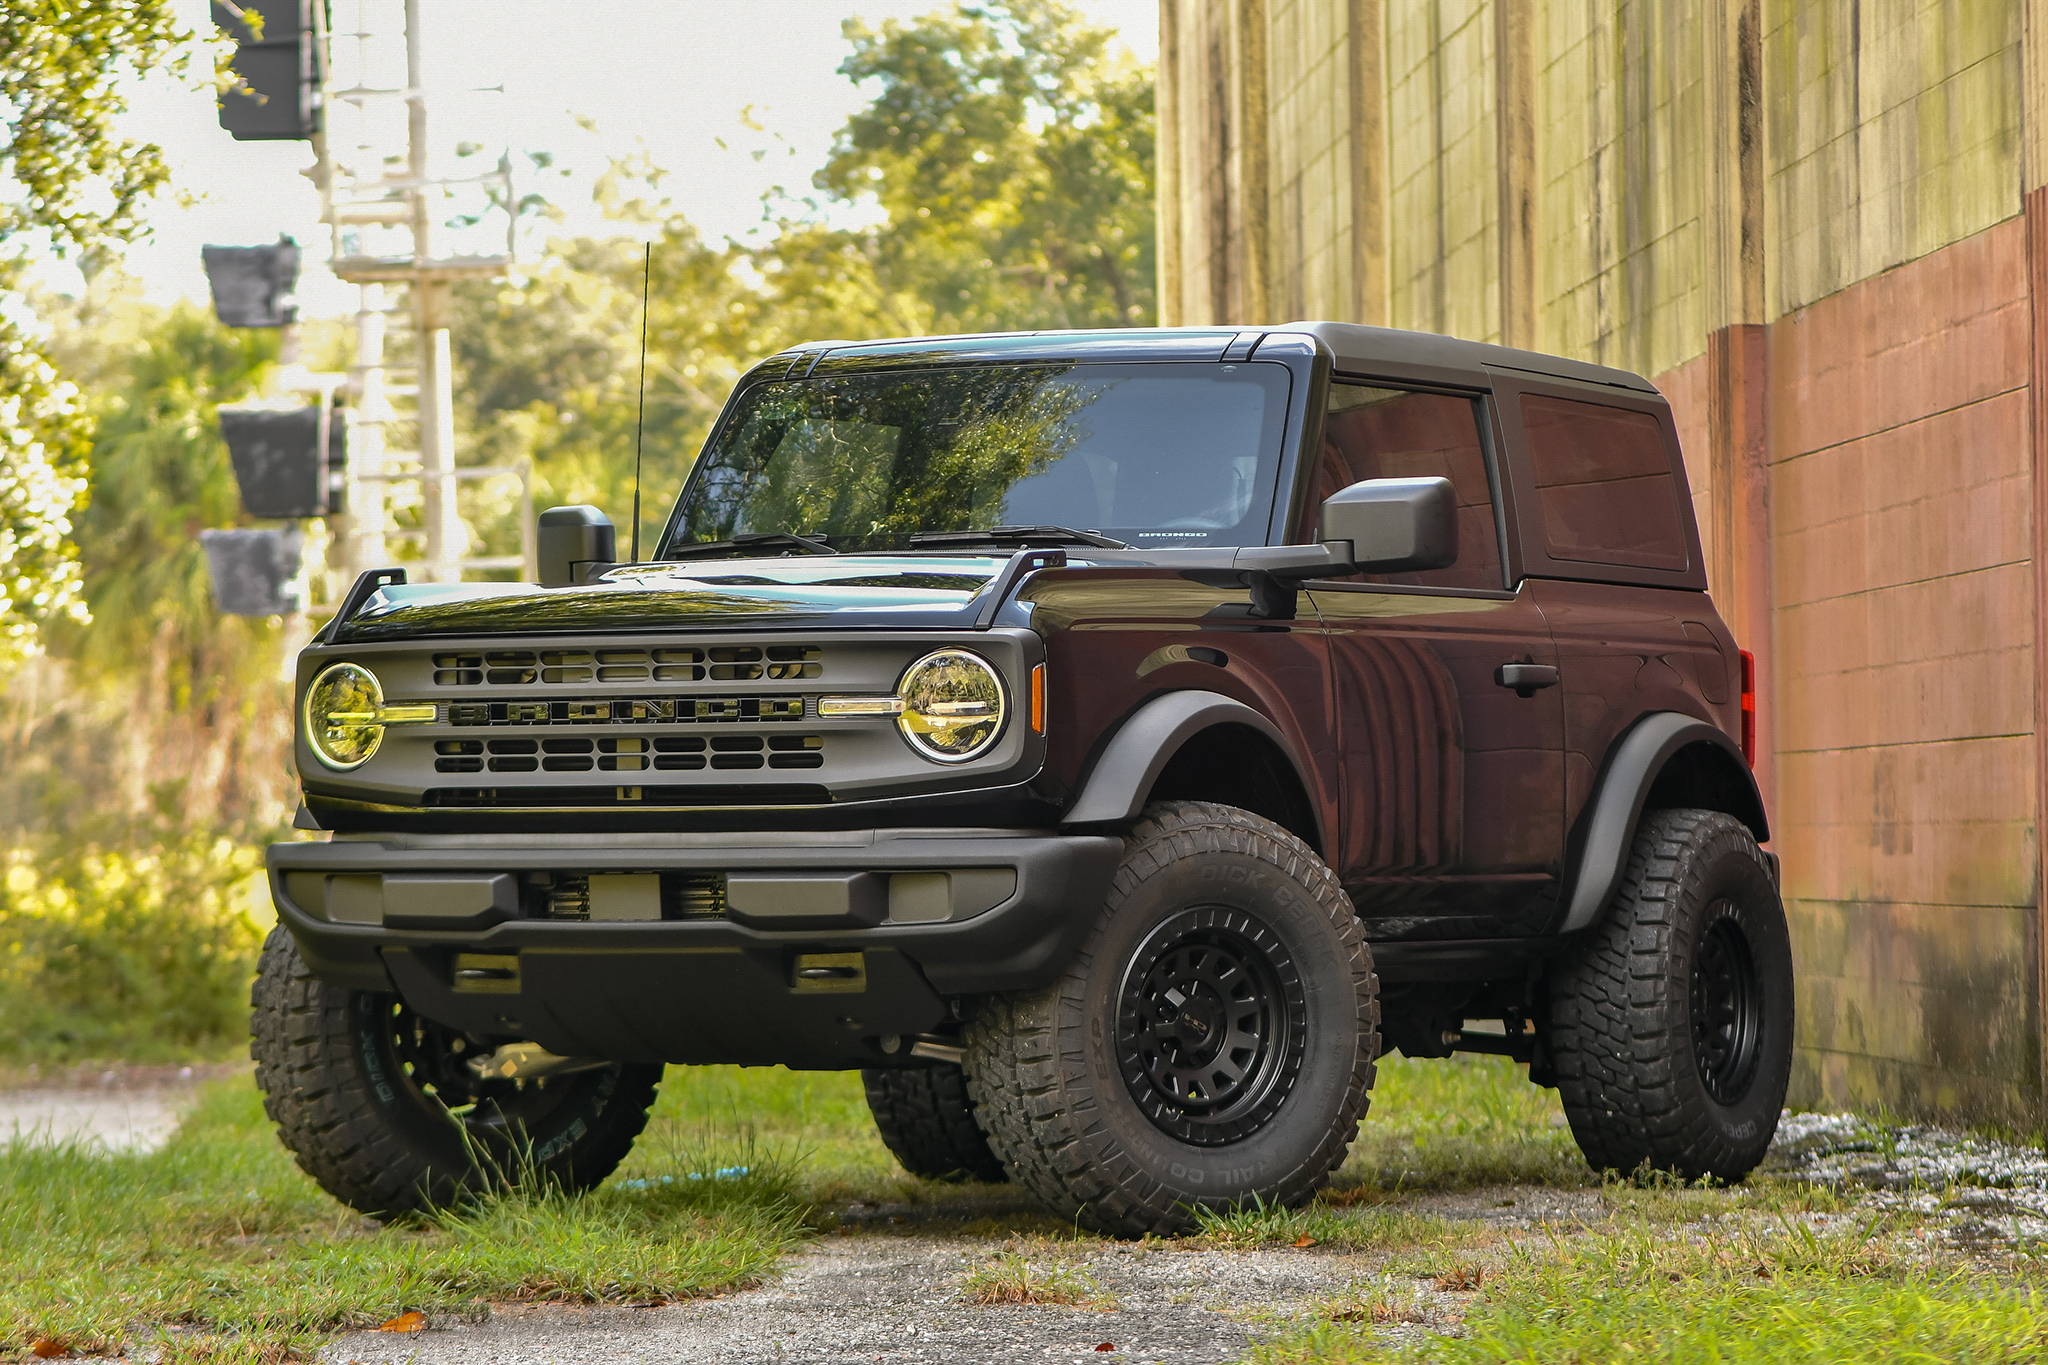 2021 FORD Bronco 2 Door Lifted with the HD Off-Road Overland Sector Venture Wheels in 17x9.0 in All Satin Black and Bronze